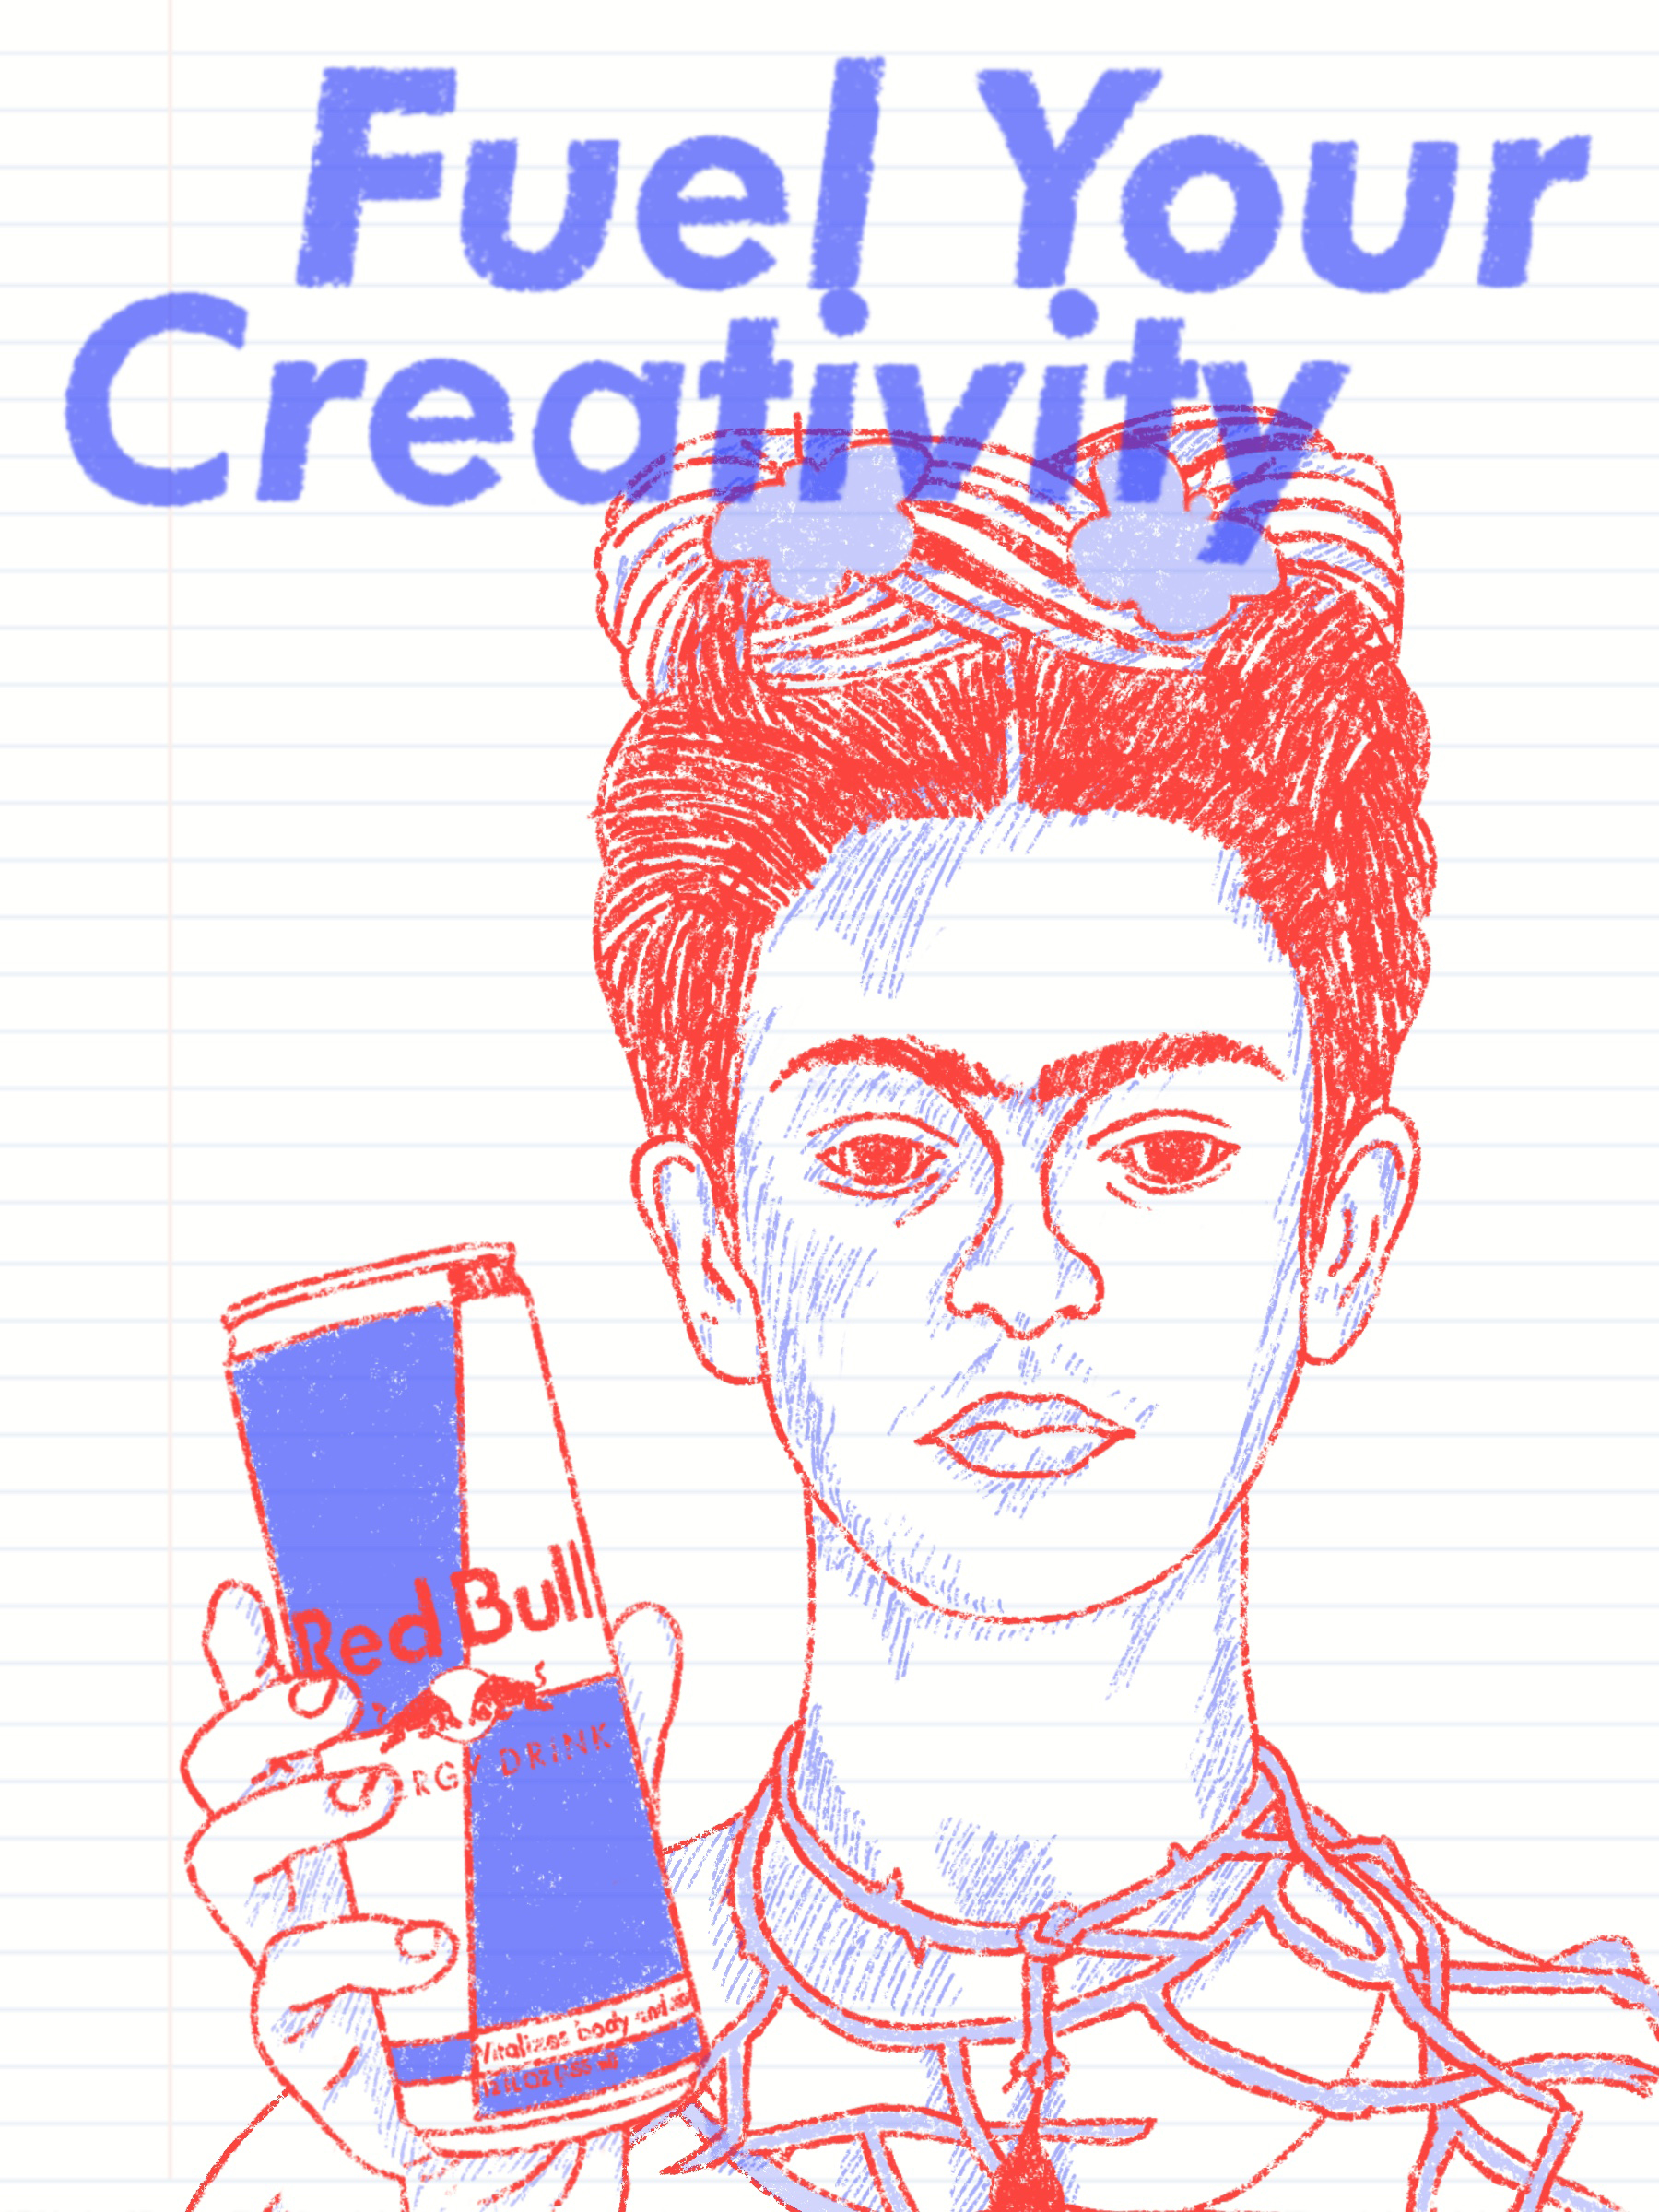 Red Bull ad featuring Frida Kahlo